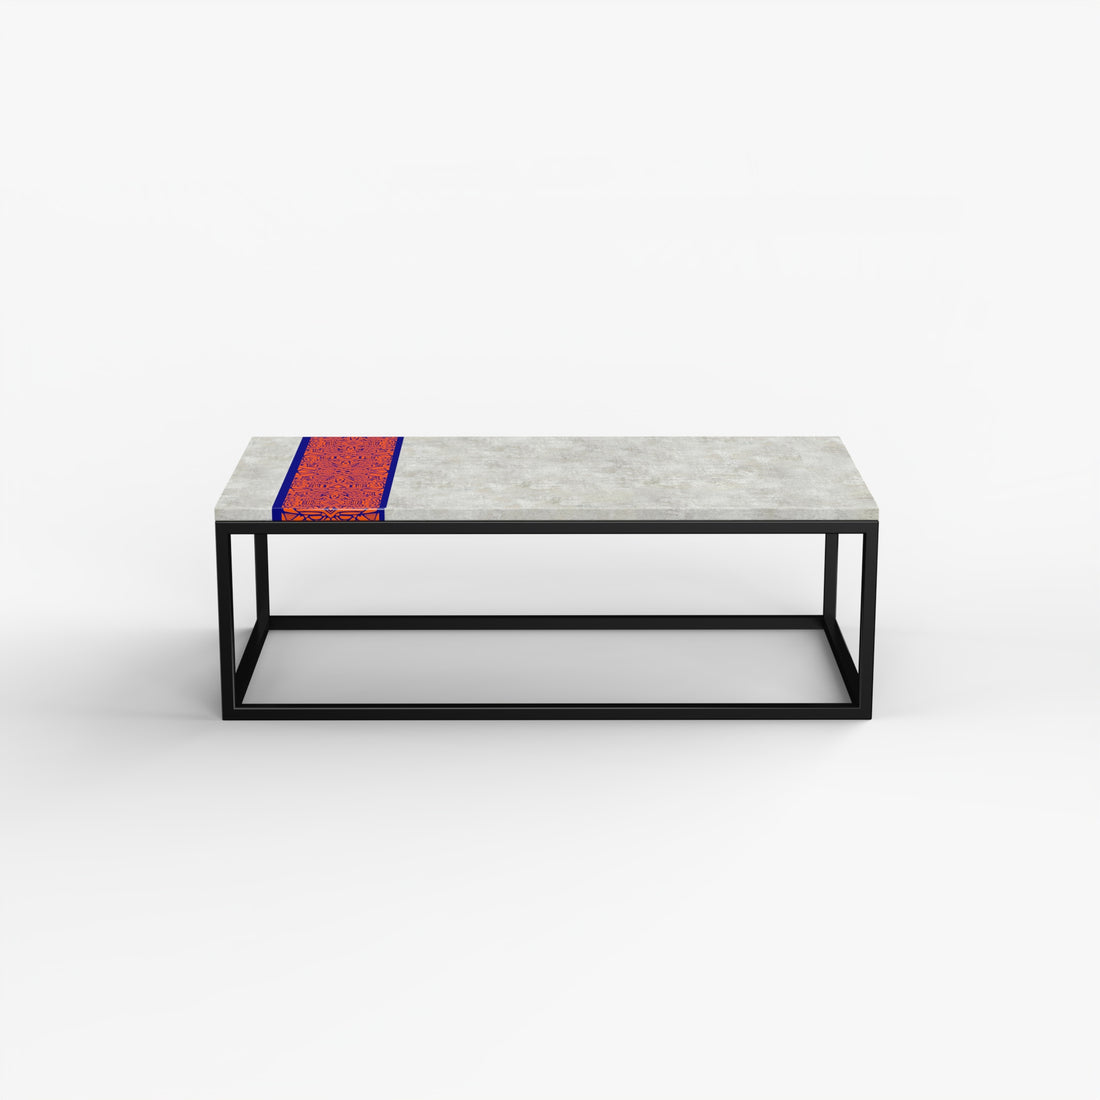 Isinmi Coffee Table - Patterned Concrete Home Office Garden | HOG-HomeOfficeGarden | HOG-Home.Office.Garden